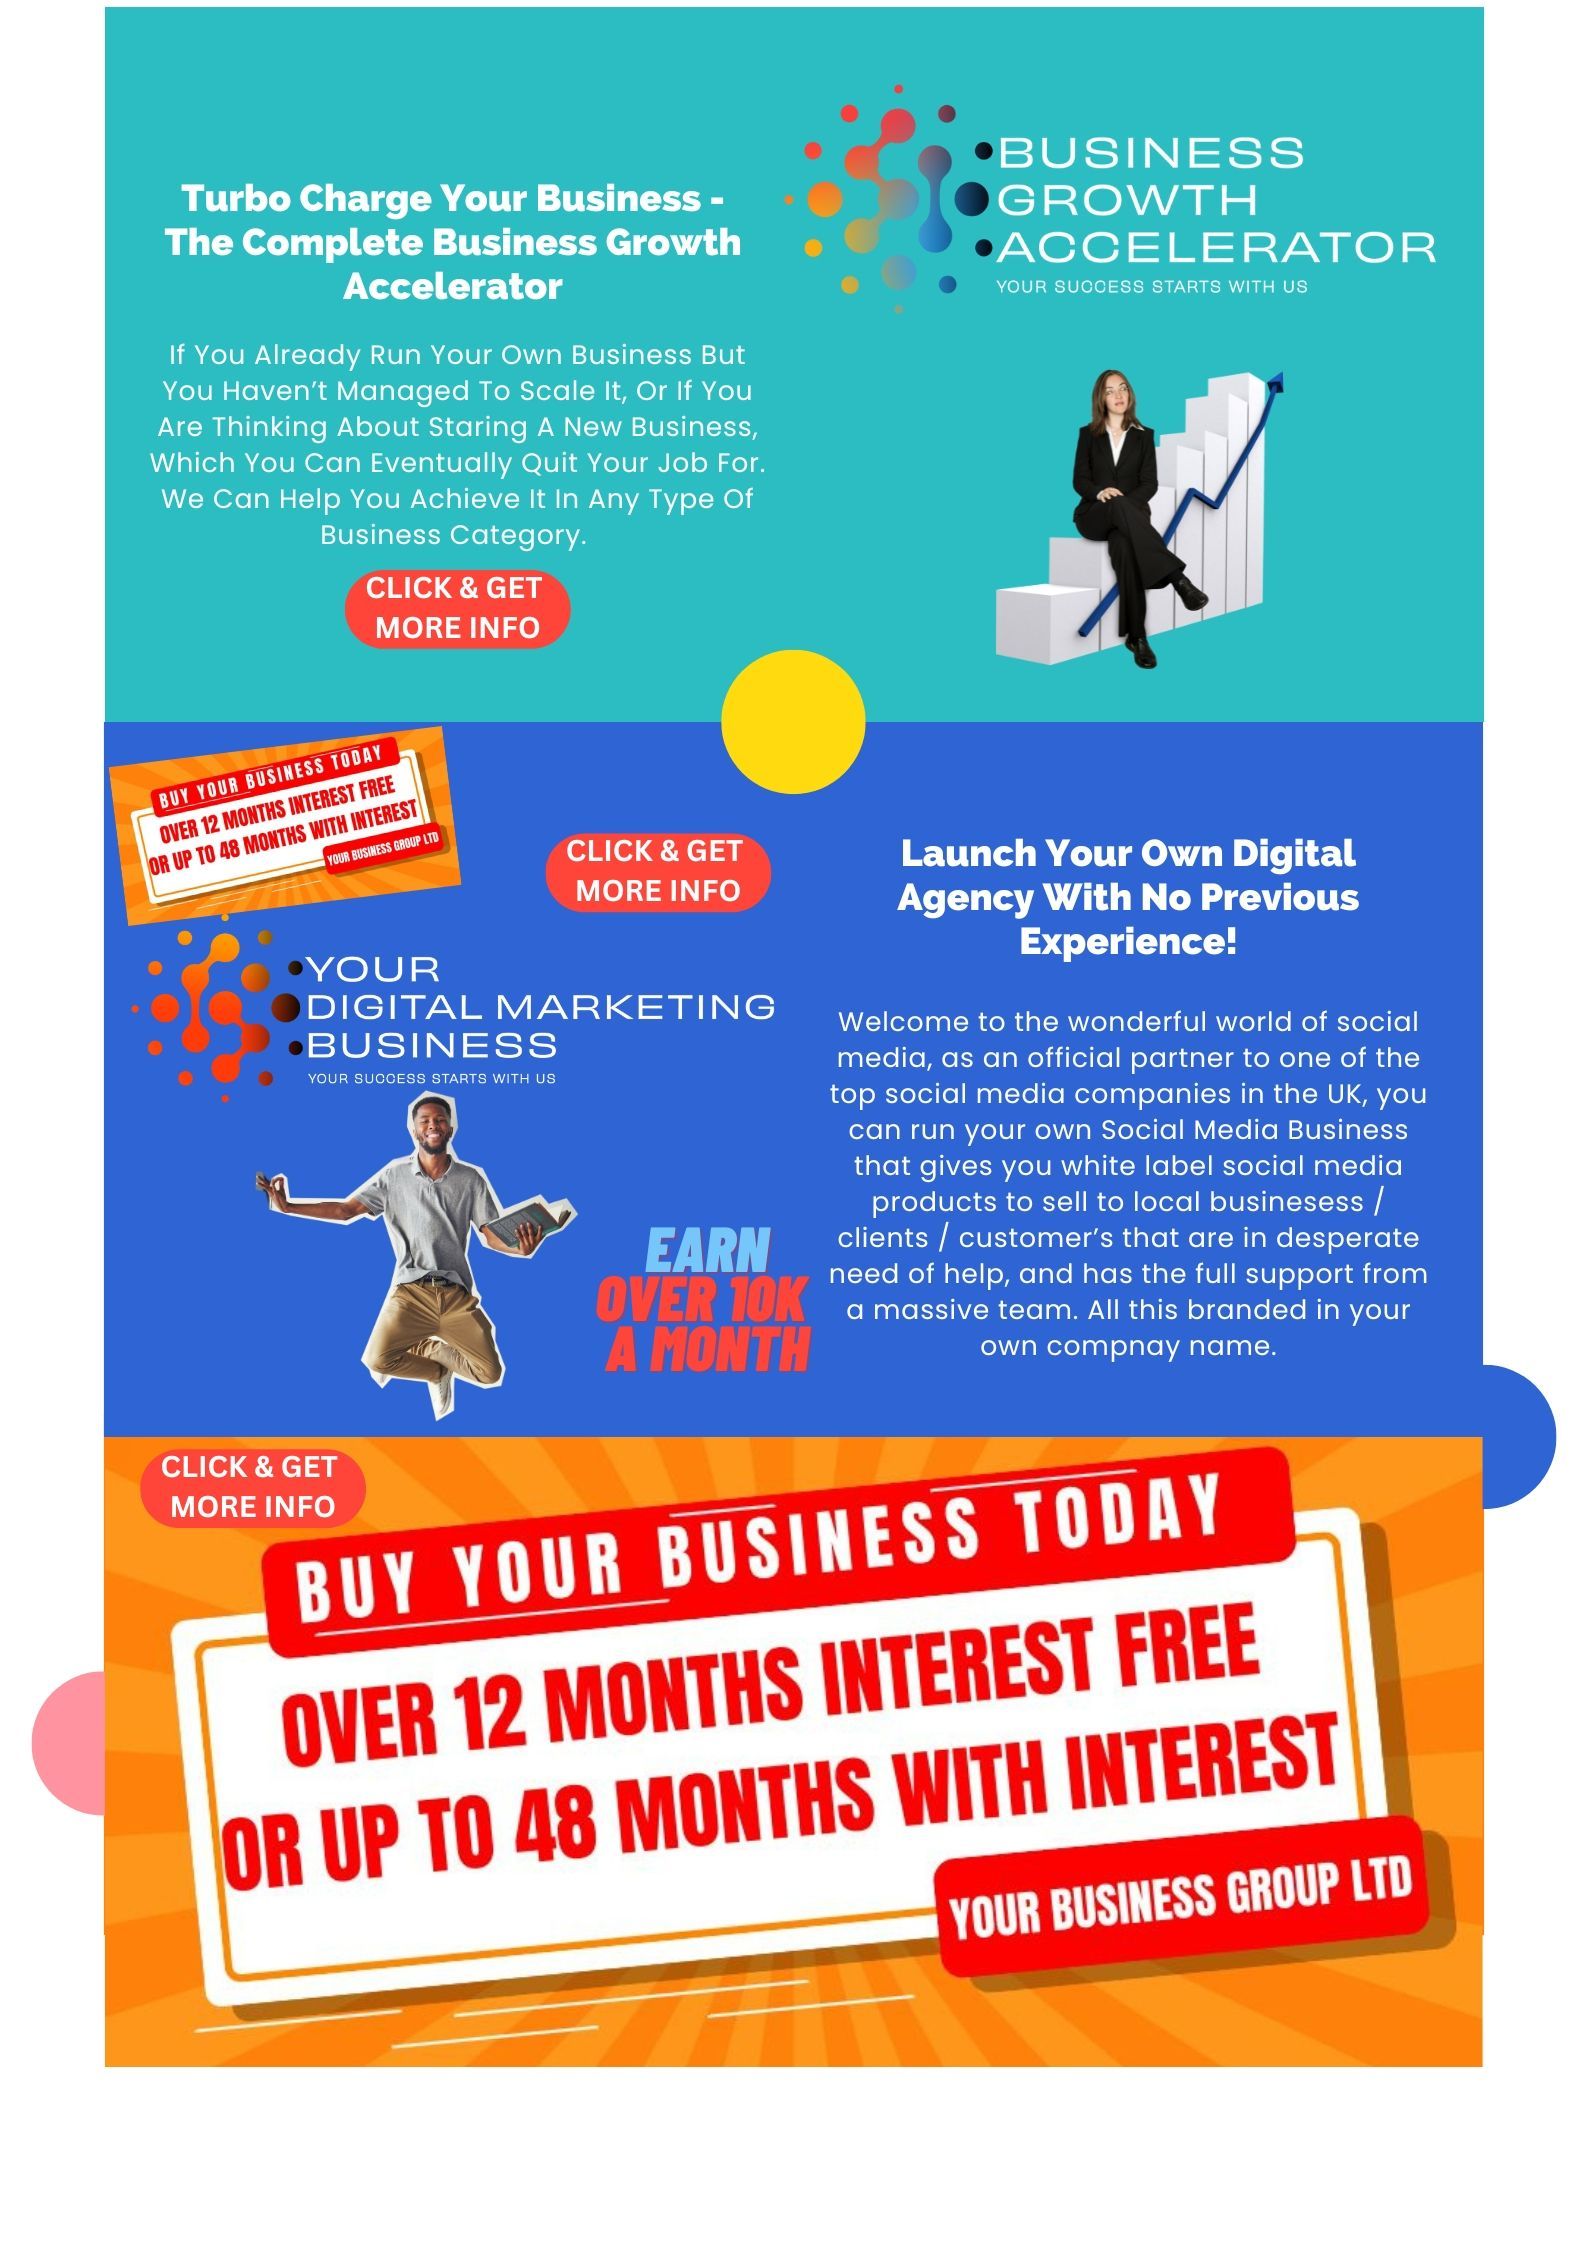 A poster that says buy your business today over 12 months interest free or up to 48 months with interest